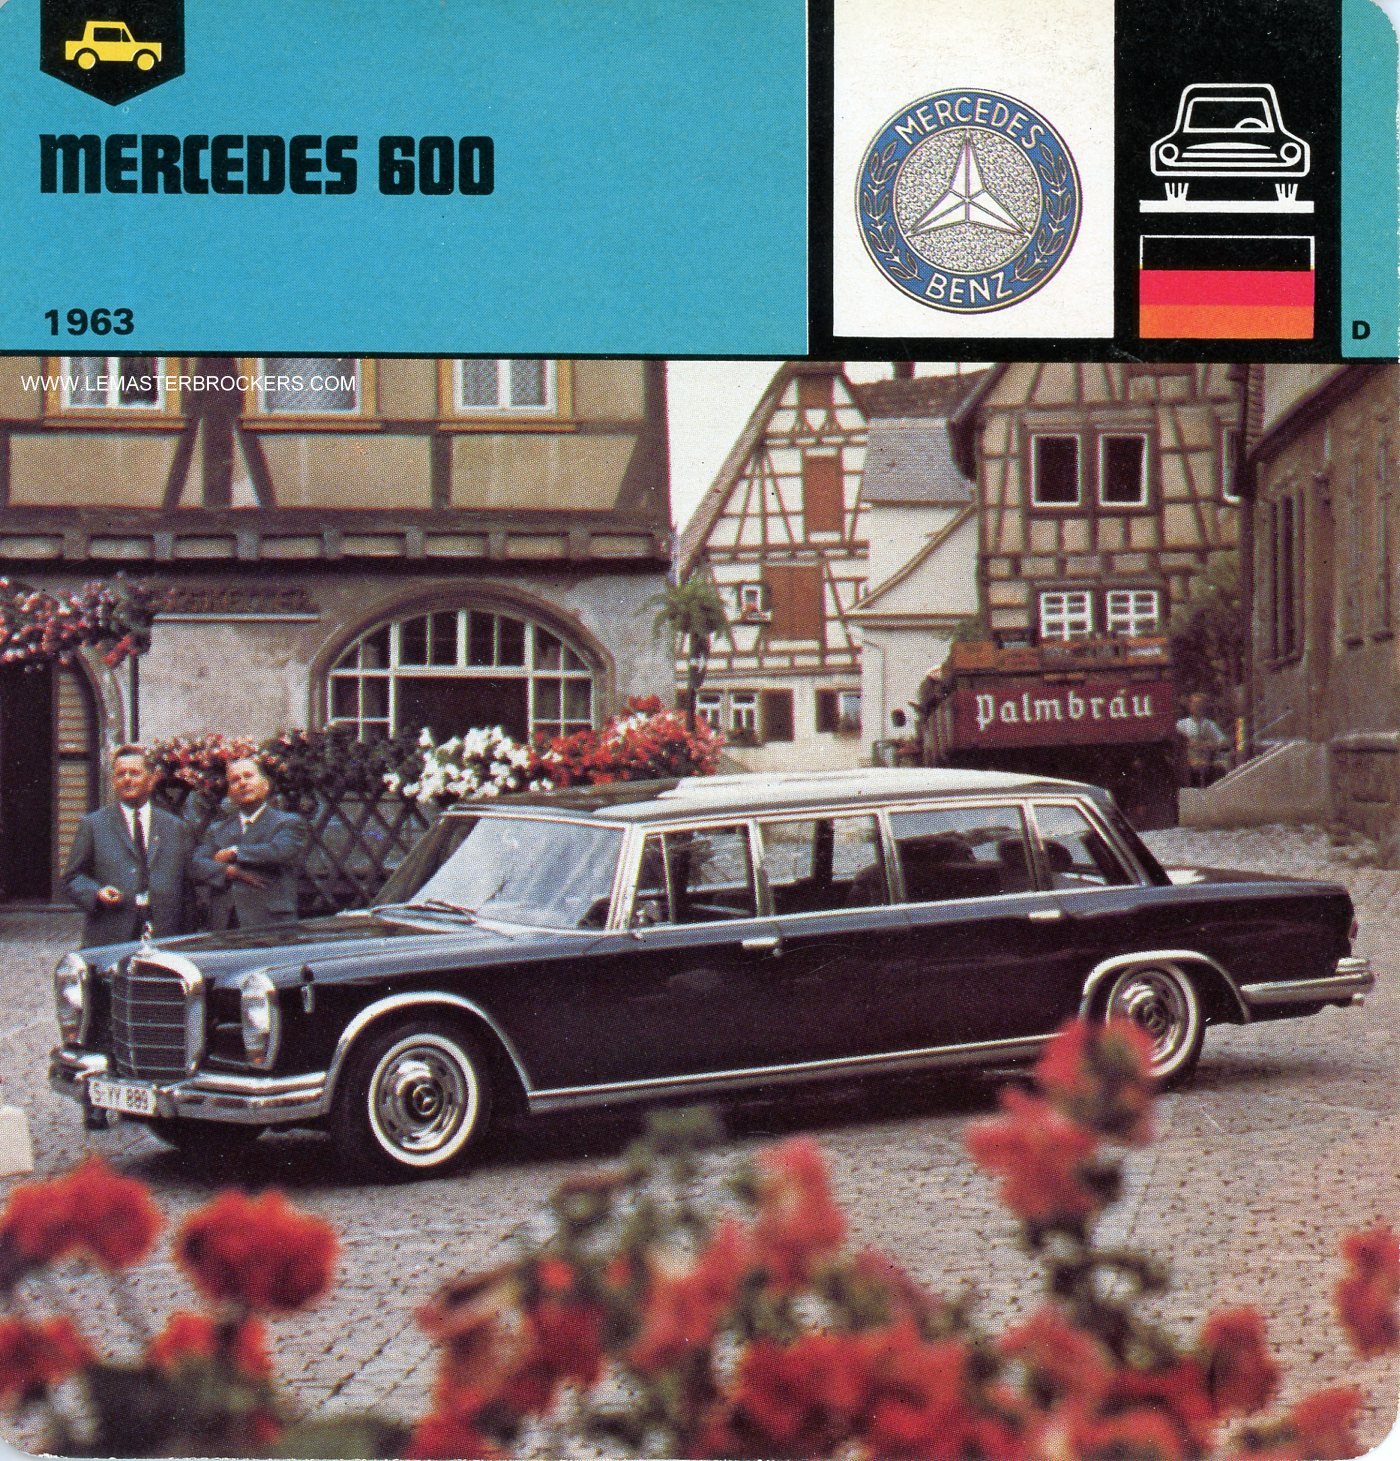 FICHE AUTO MERCEDES 600 CARS CARD LEMASTERBROCKERS